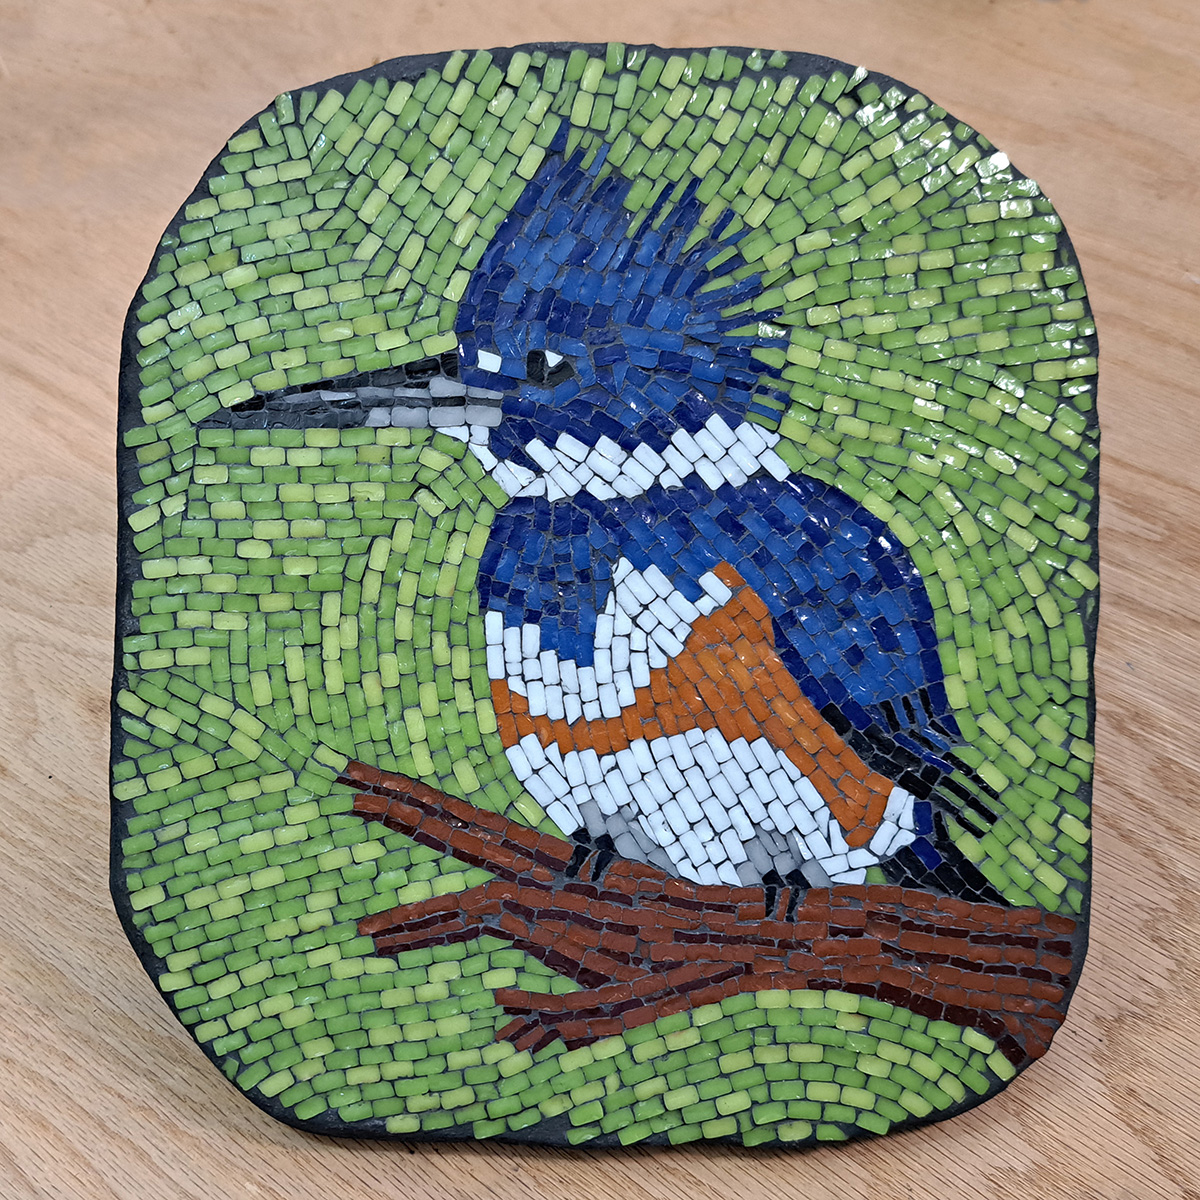 Kingfisher Mosaic: Improvising over a Pattern